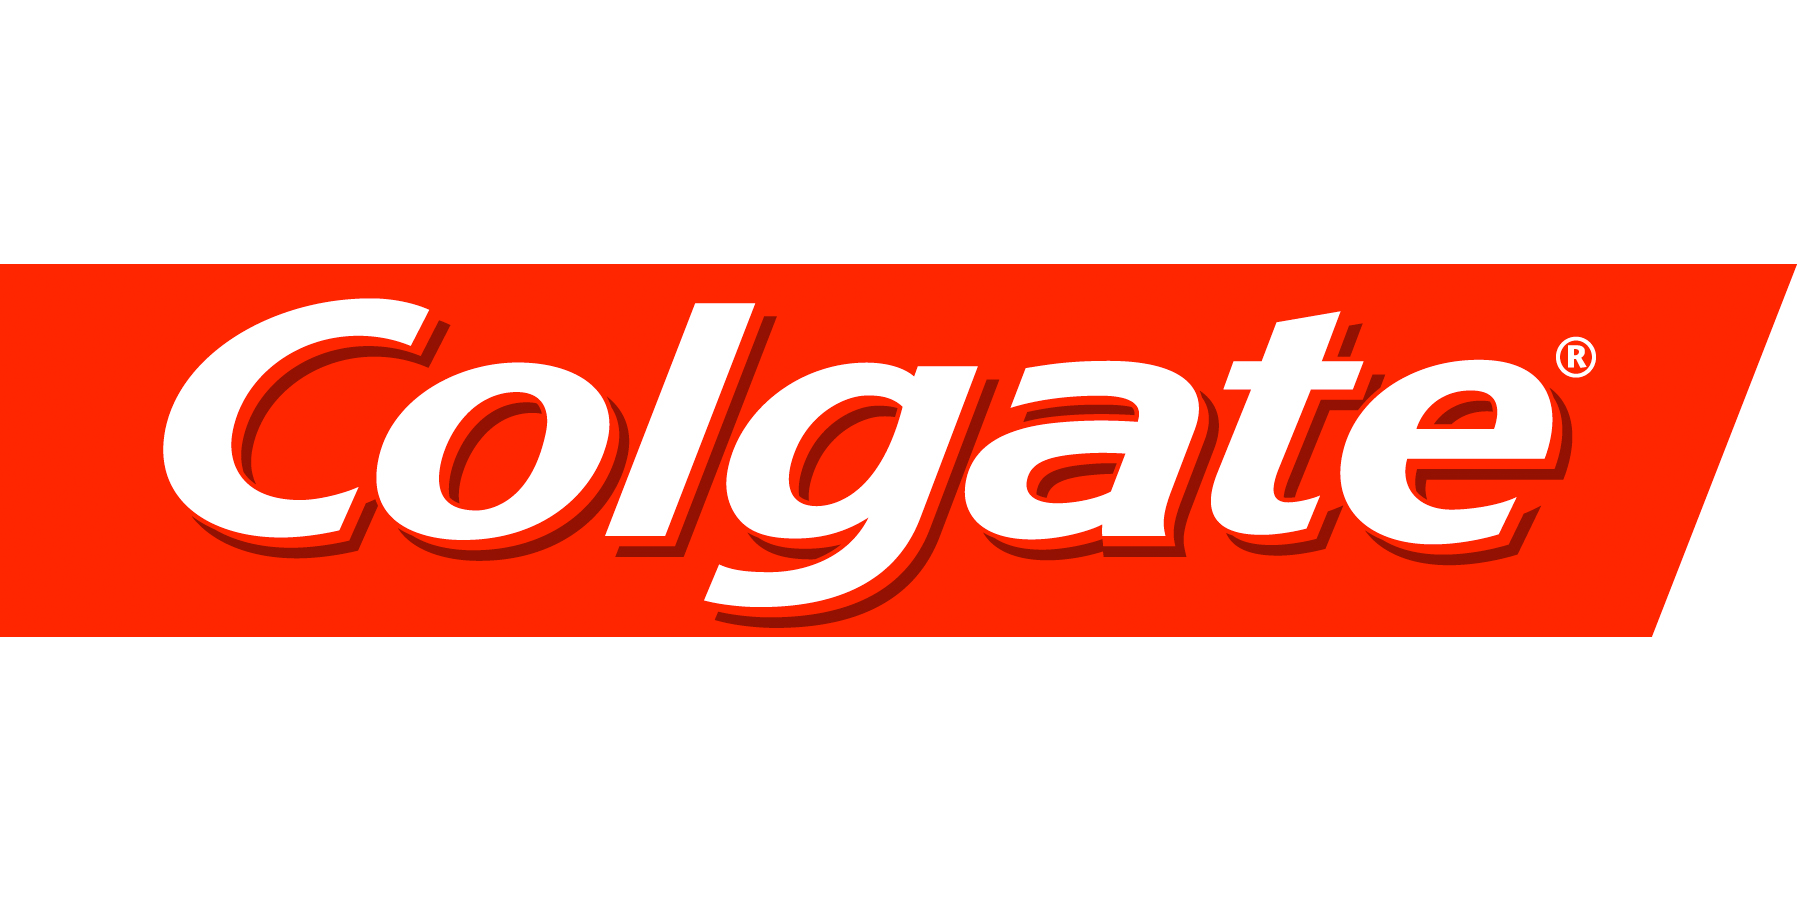 toothpaste two font logos